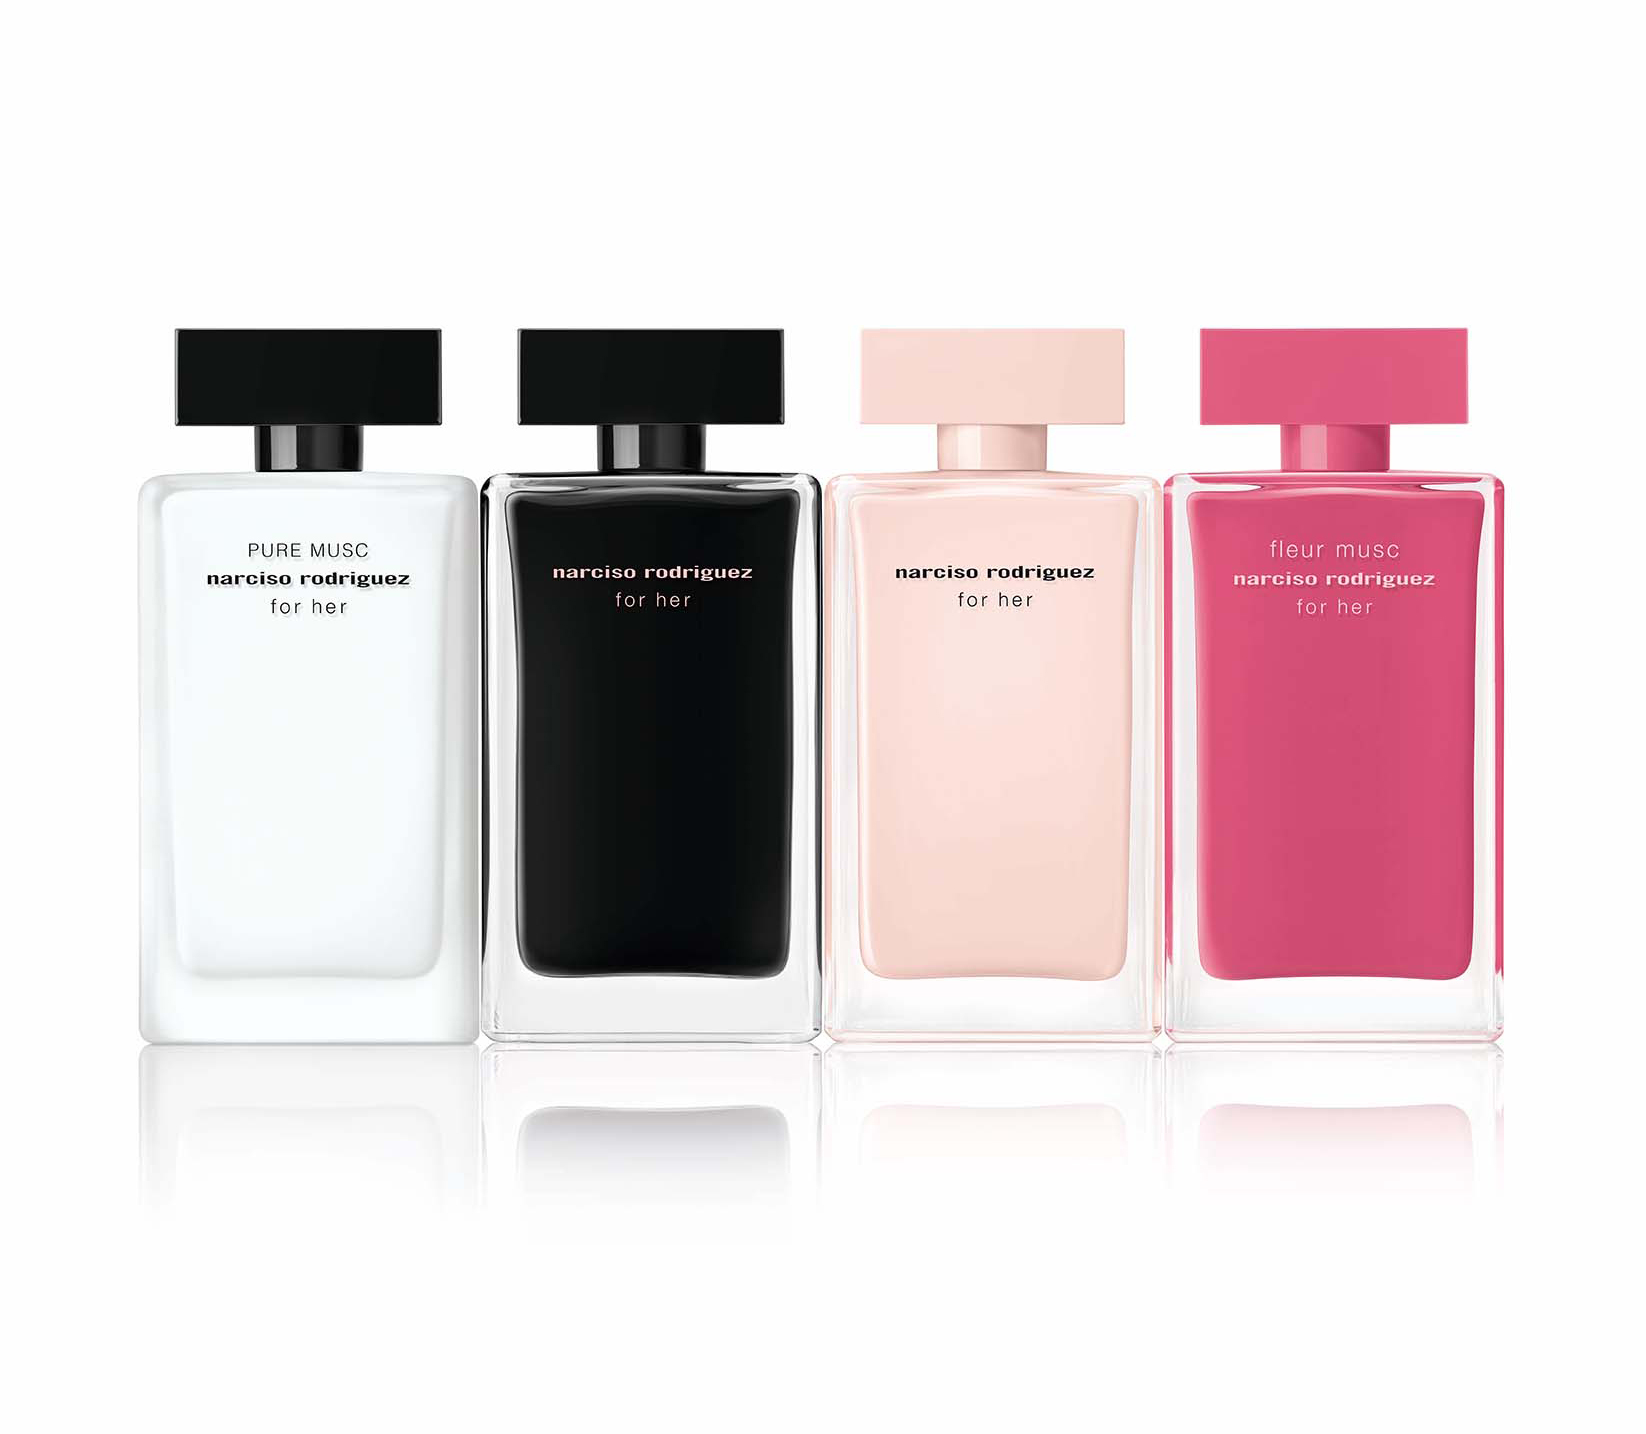 Pure Musc For Her Narciso Rodriguez Perfume A Fragrance For Women 2019